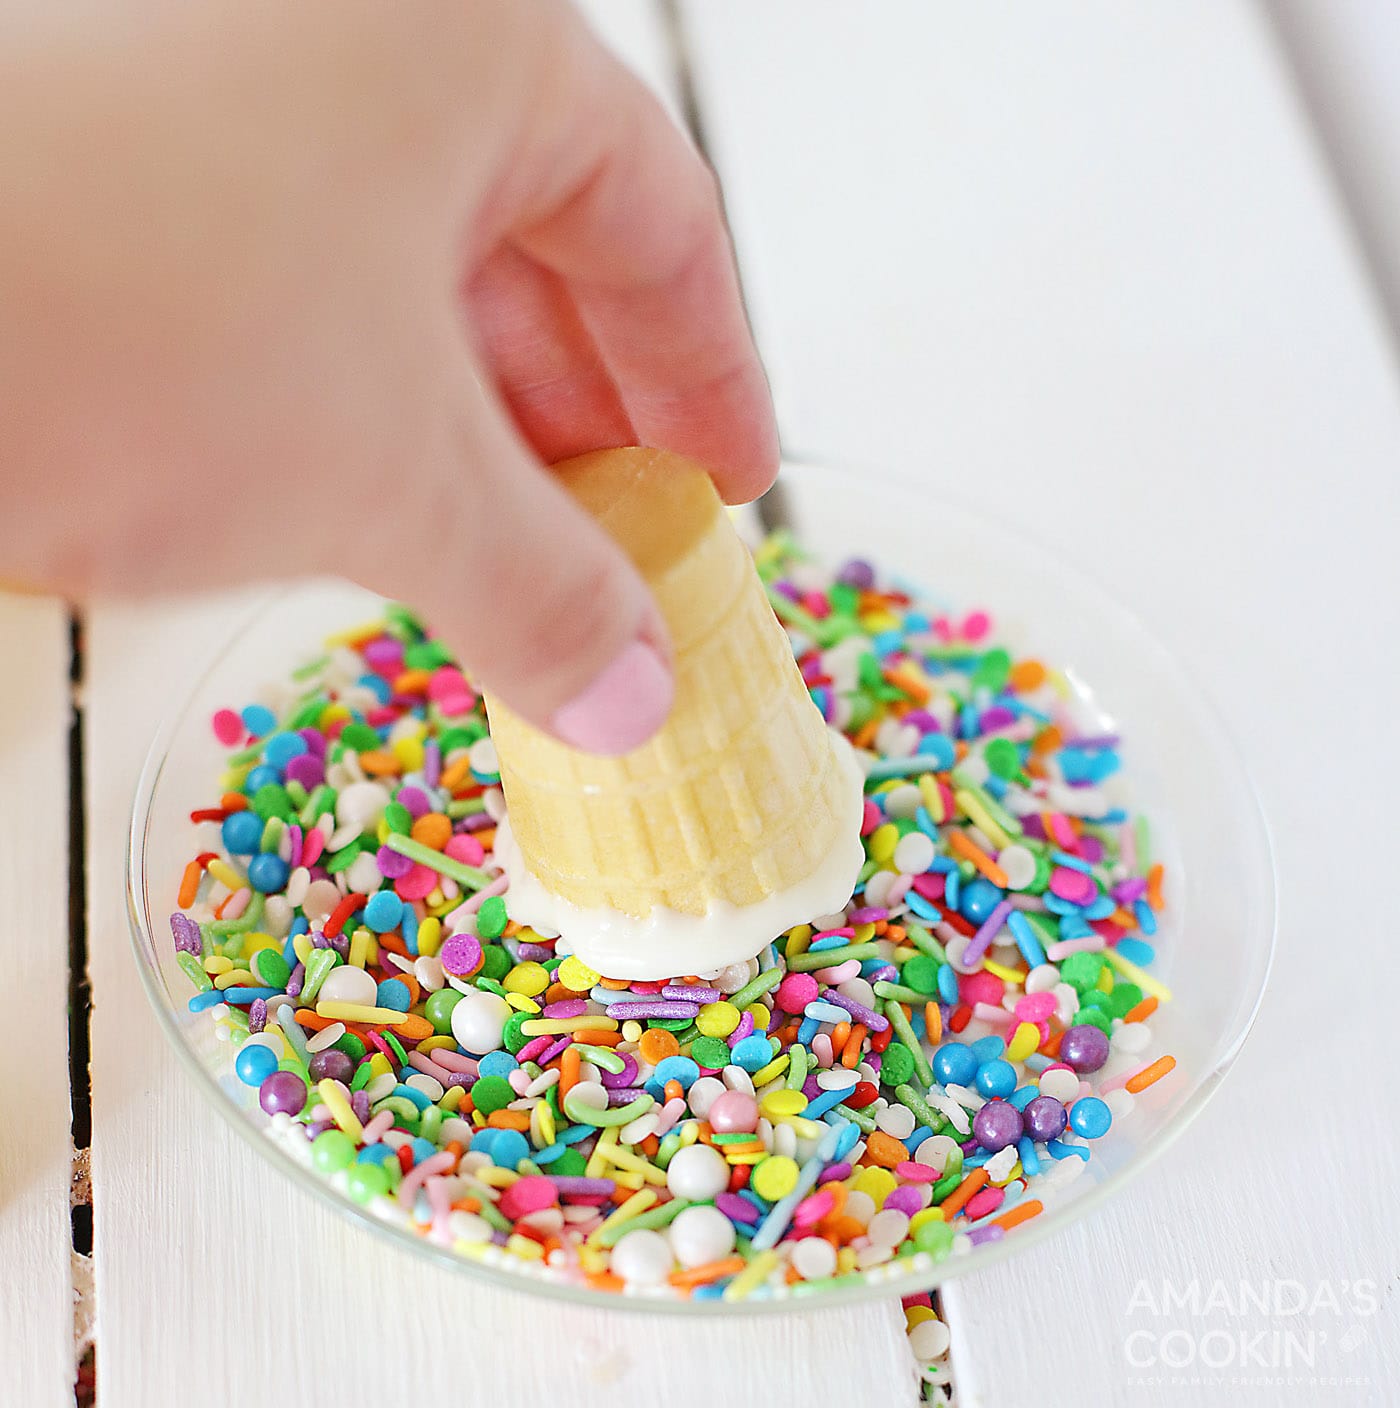 dipping chocolate coated ice cream cone in sprinkles